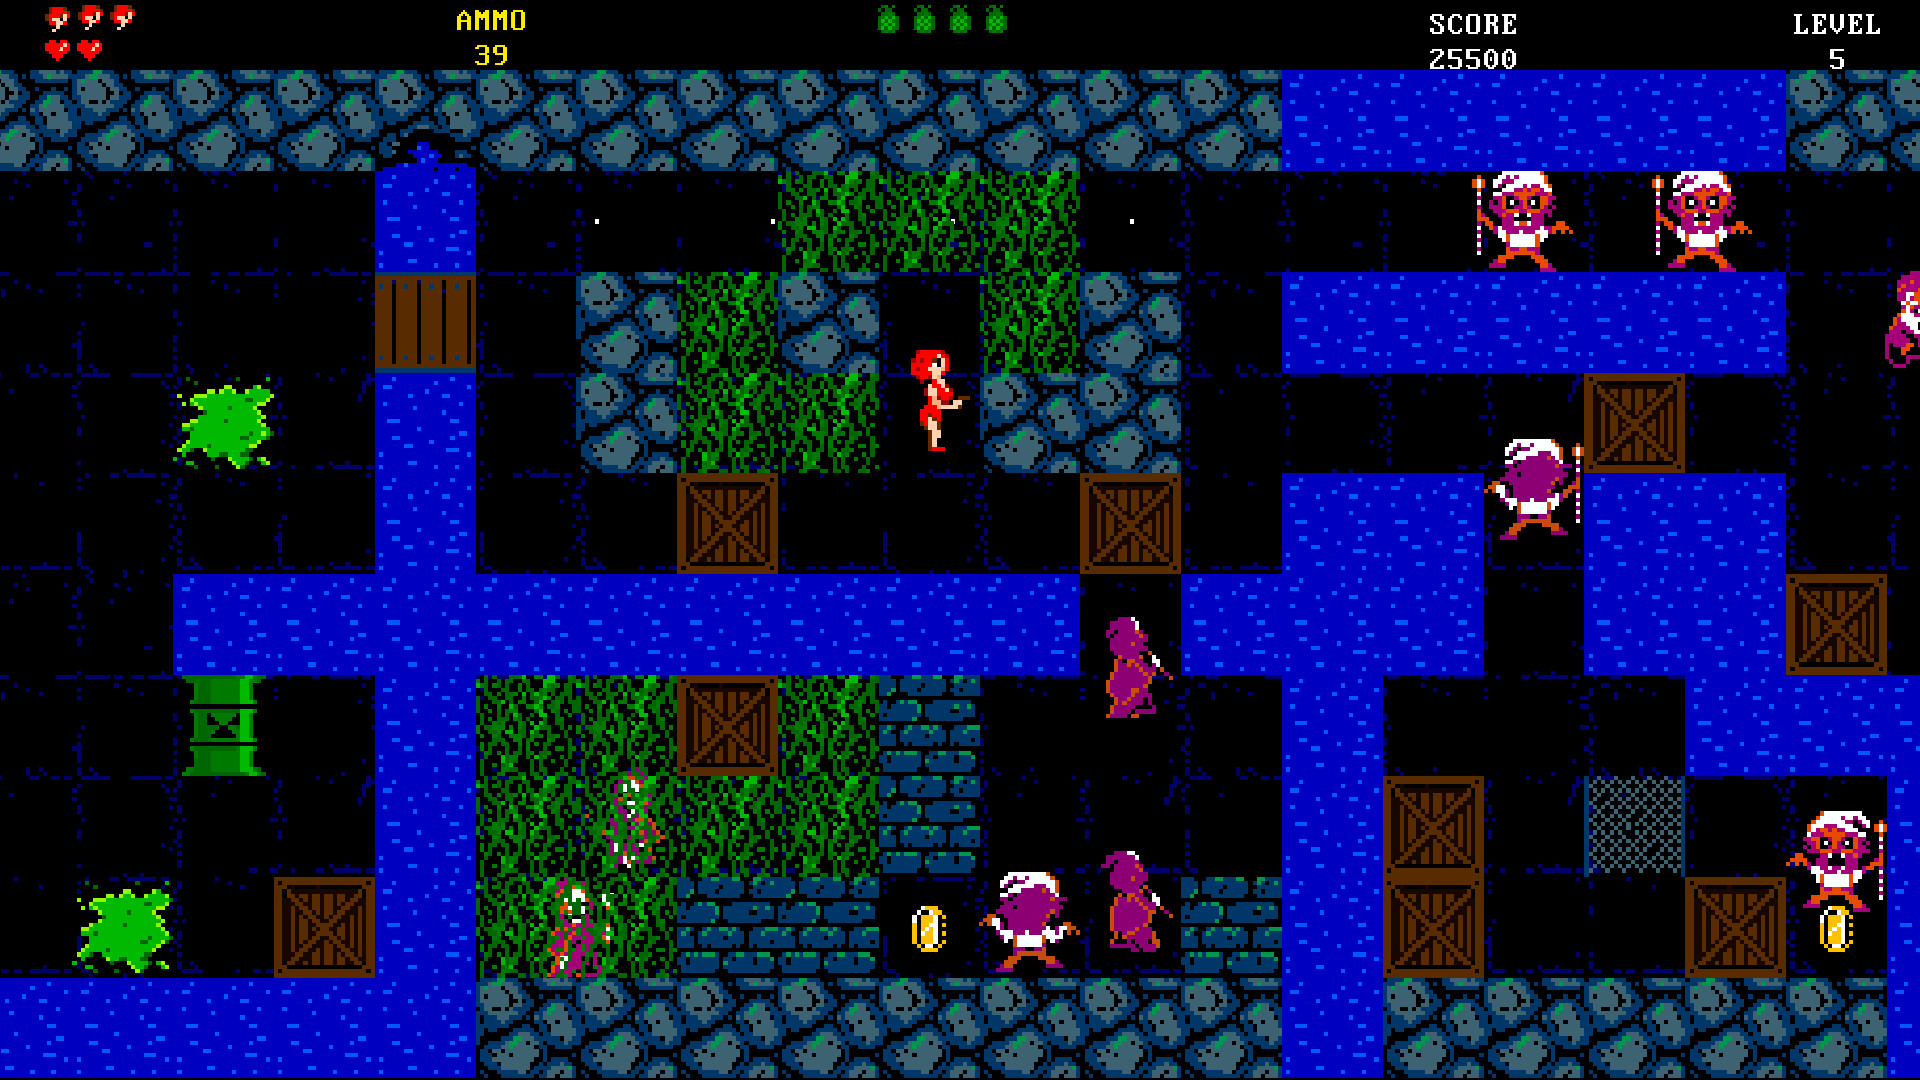 Radioactive dwarfs: evil from the sewers Free Download